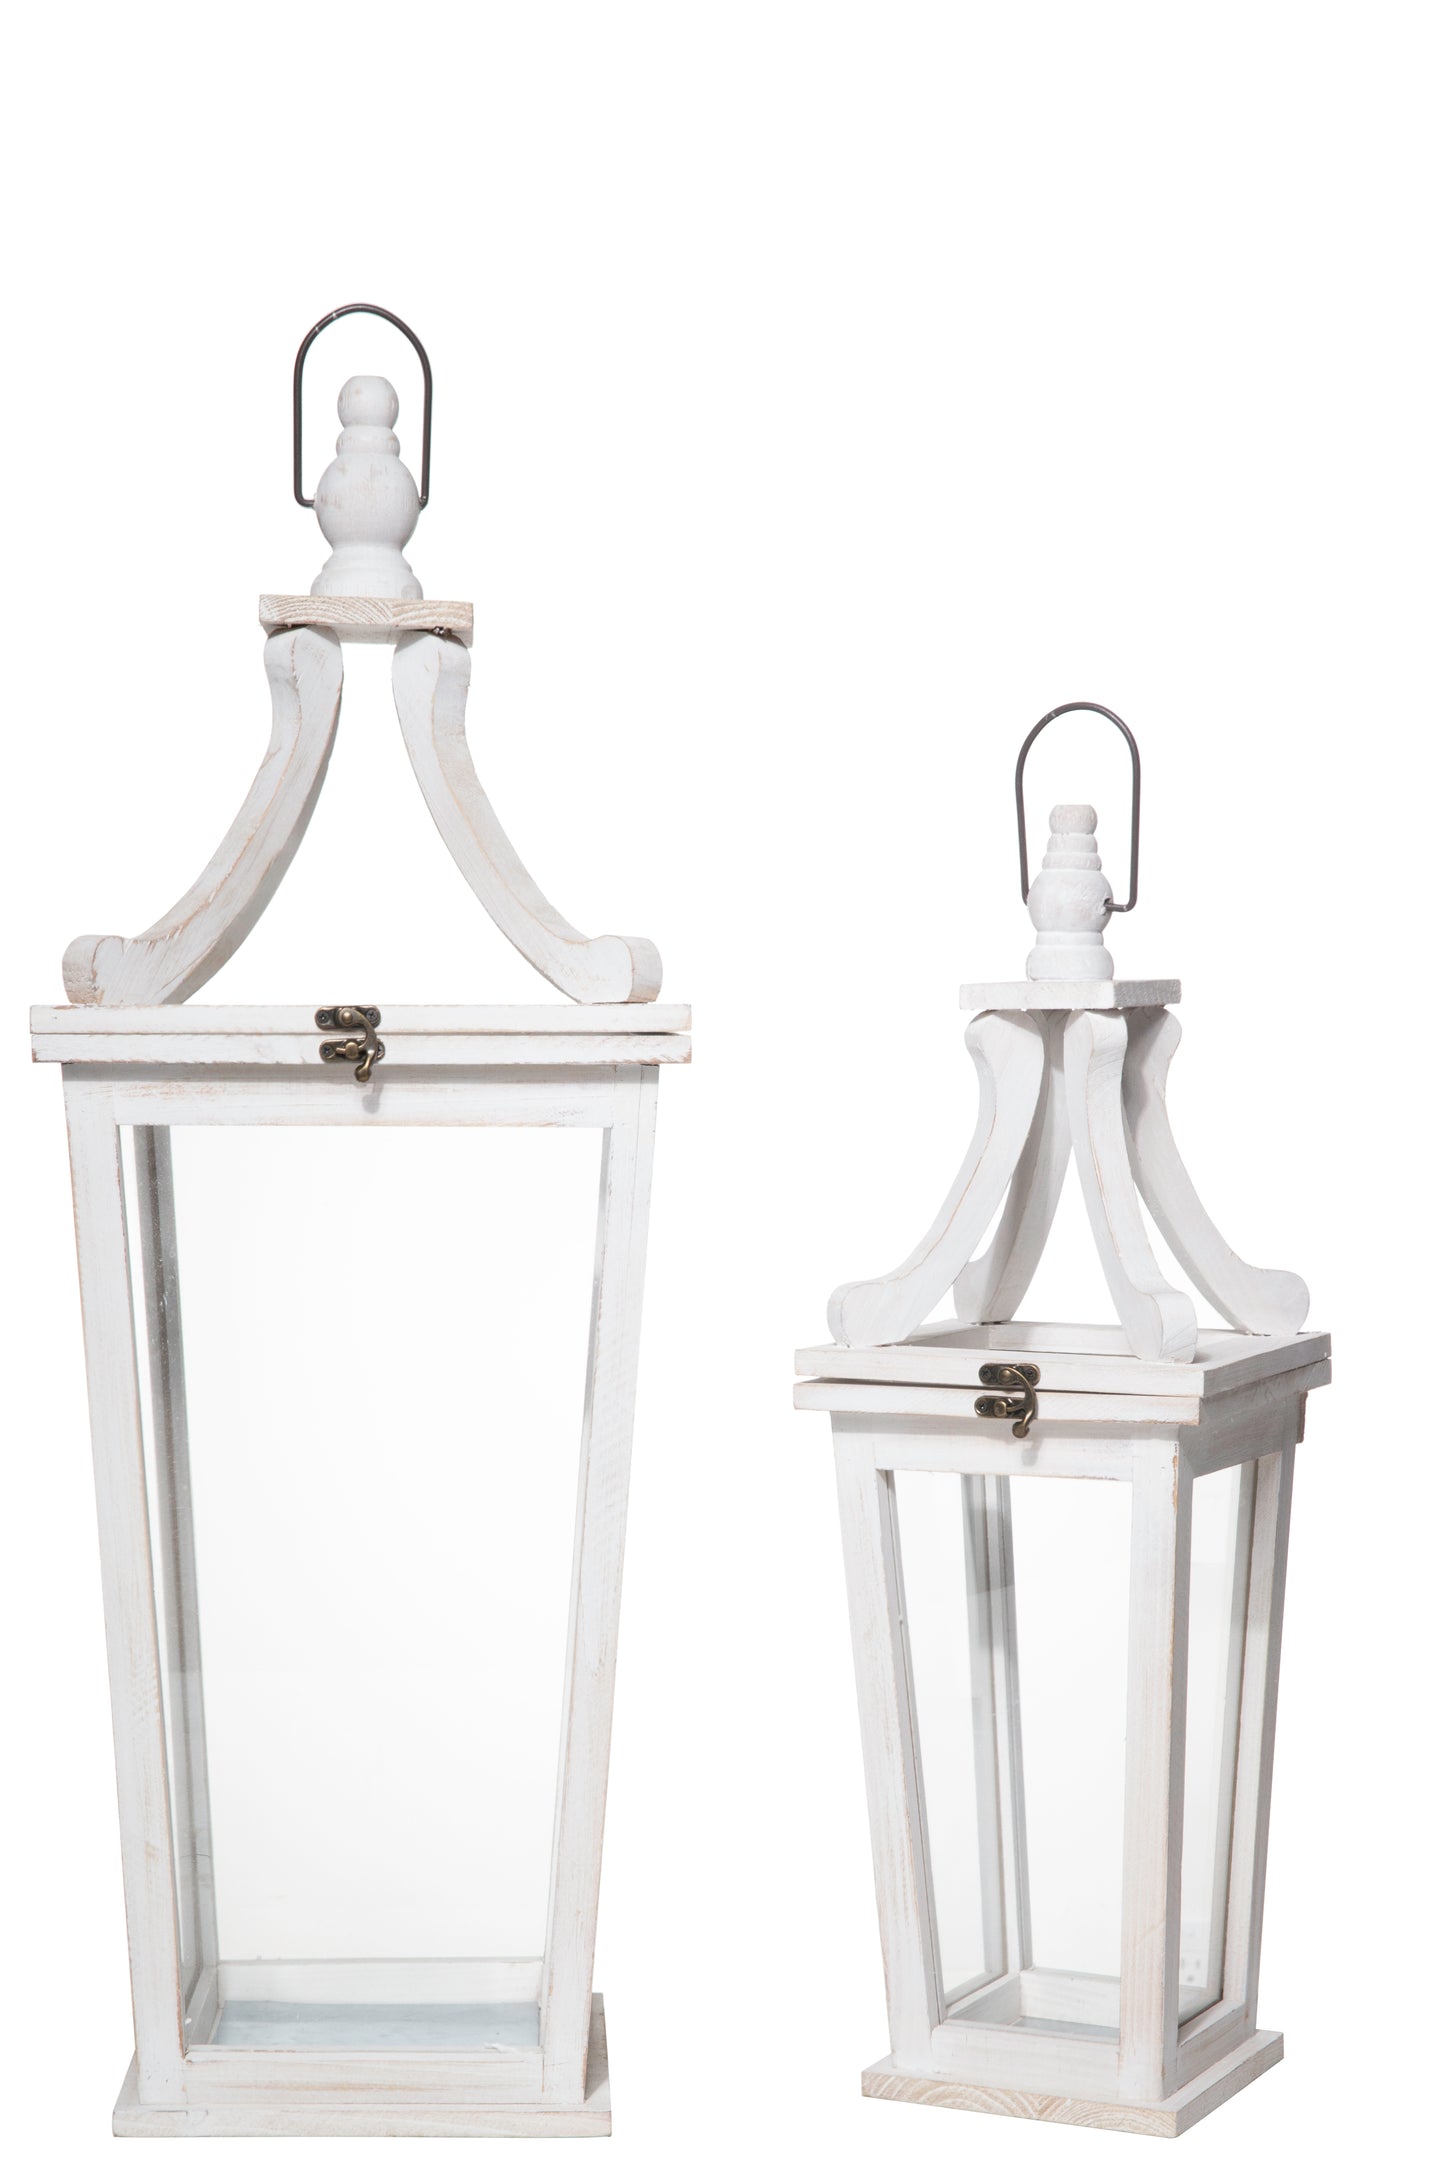 Wood Square Lantern with Metal Top Handle and Glass Covered Design